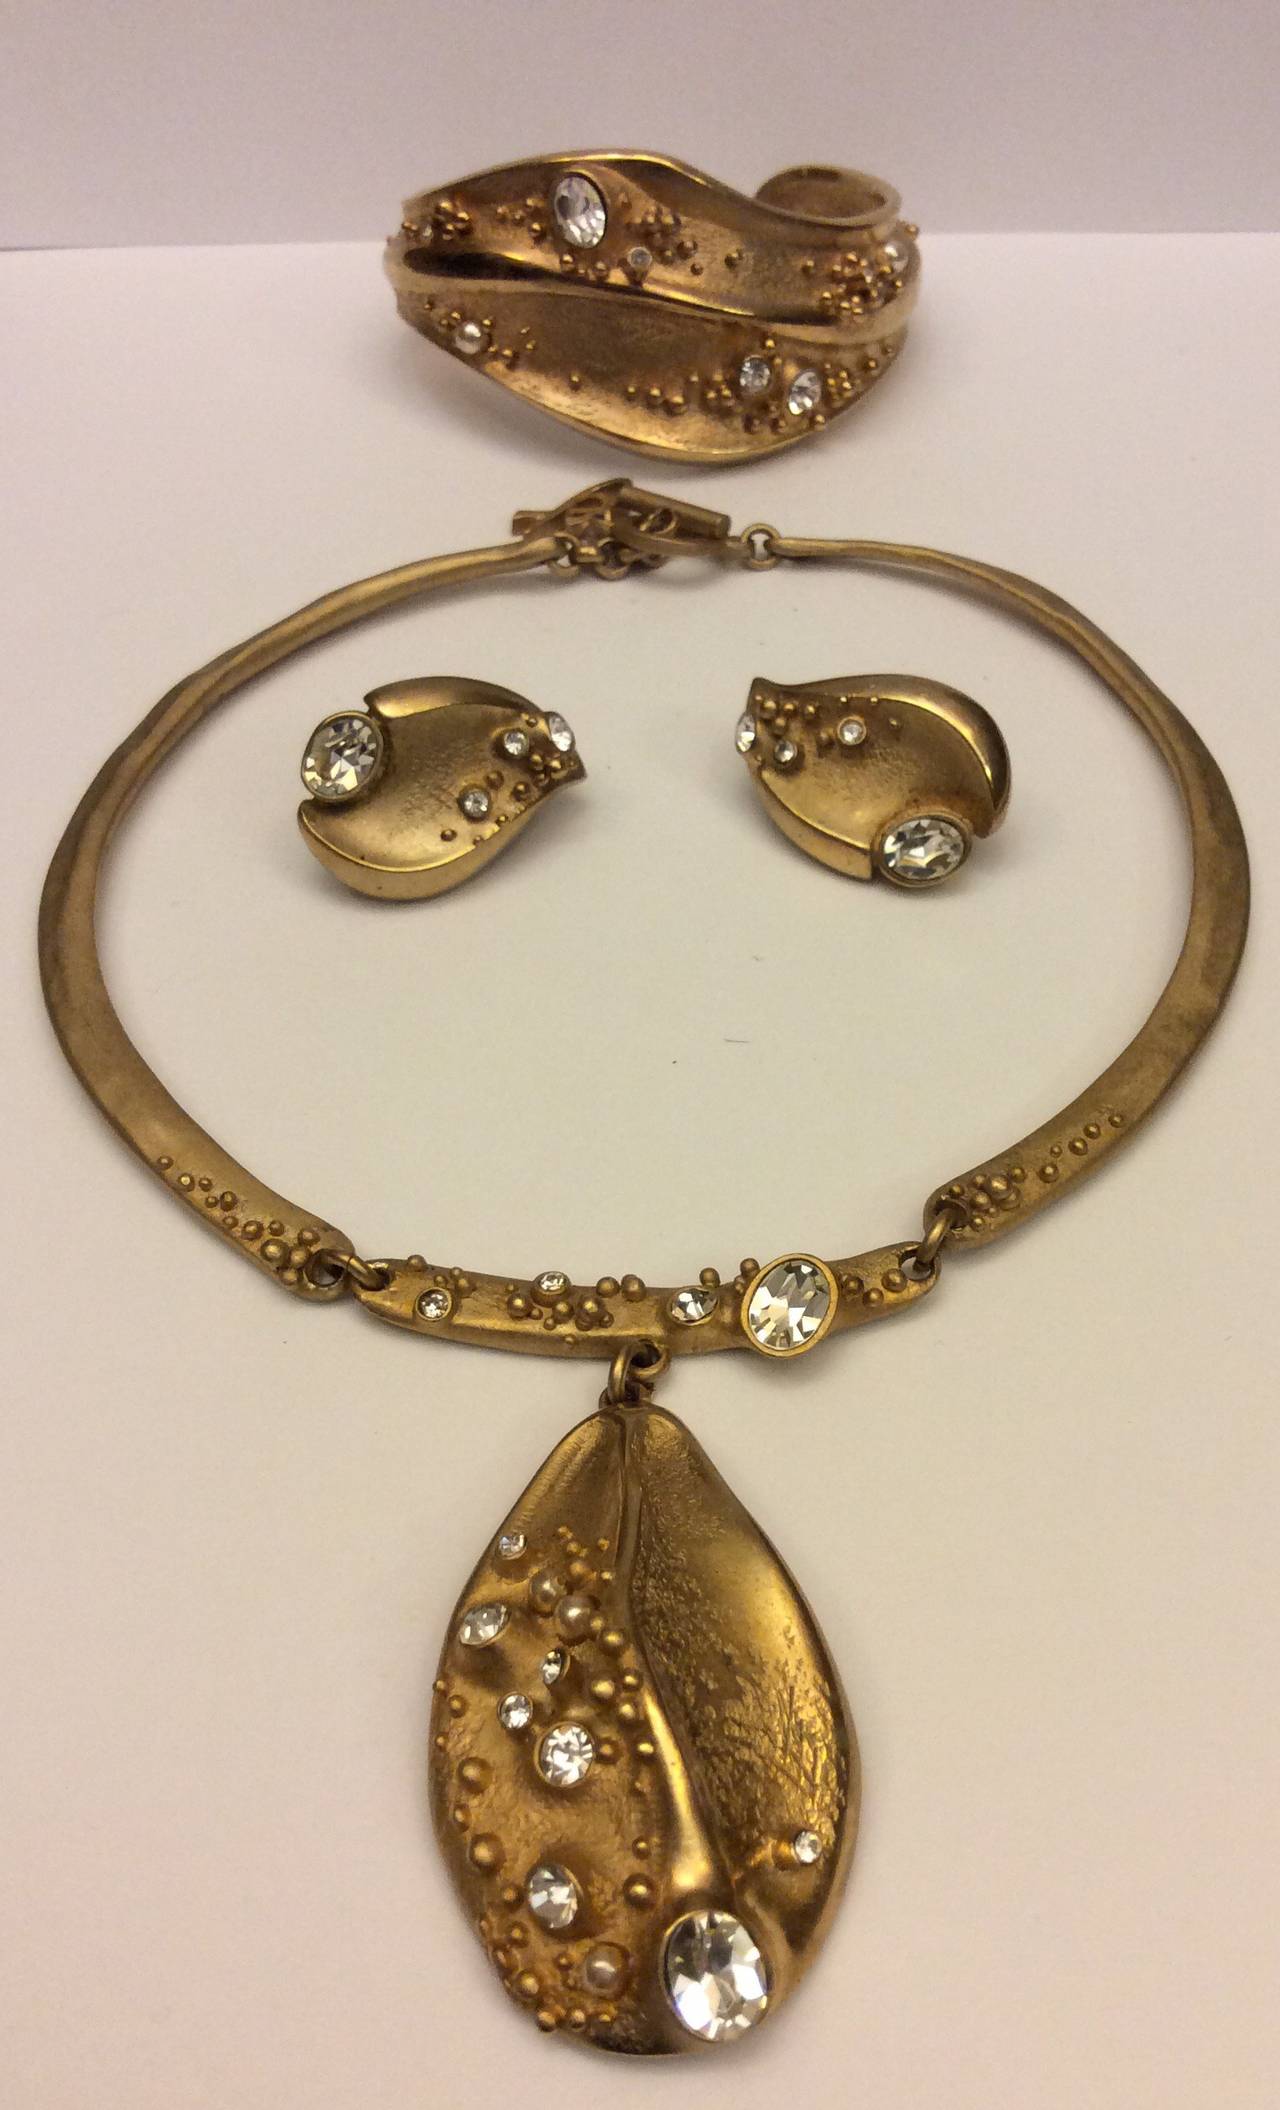 Stunning Christian Lacroix matching three-piece choker necklace, clip on earrings, and cuff bracelet.  Rustic gold with random float crystals. 
Perfect Condition
Necklace 16